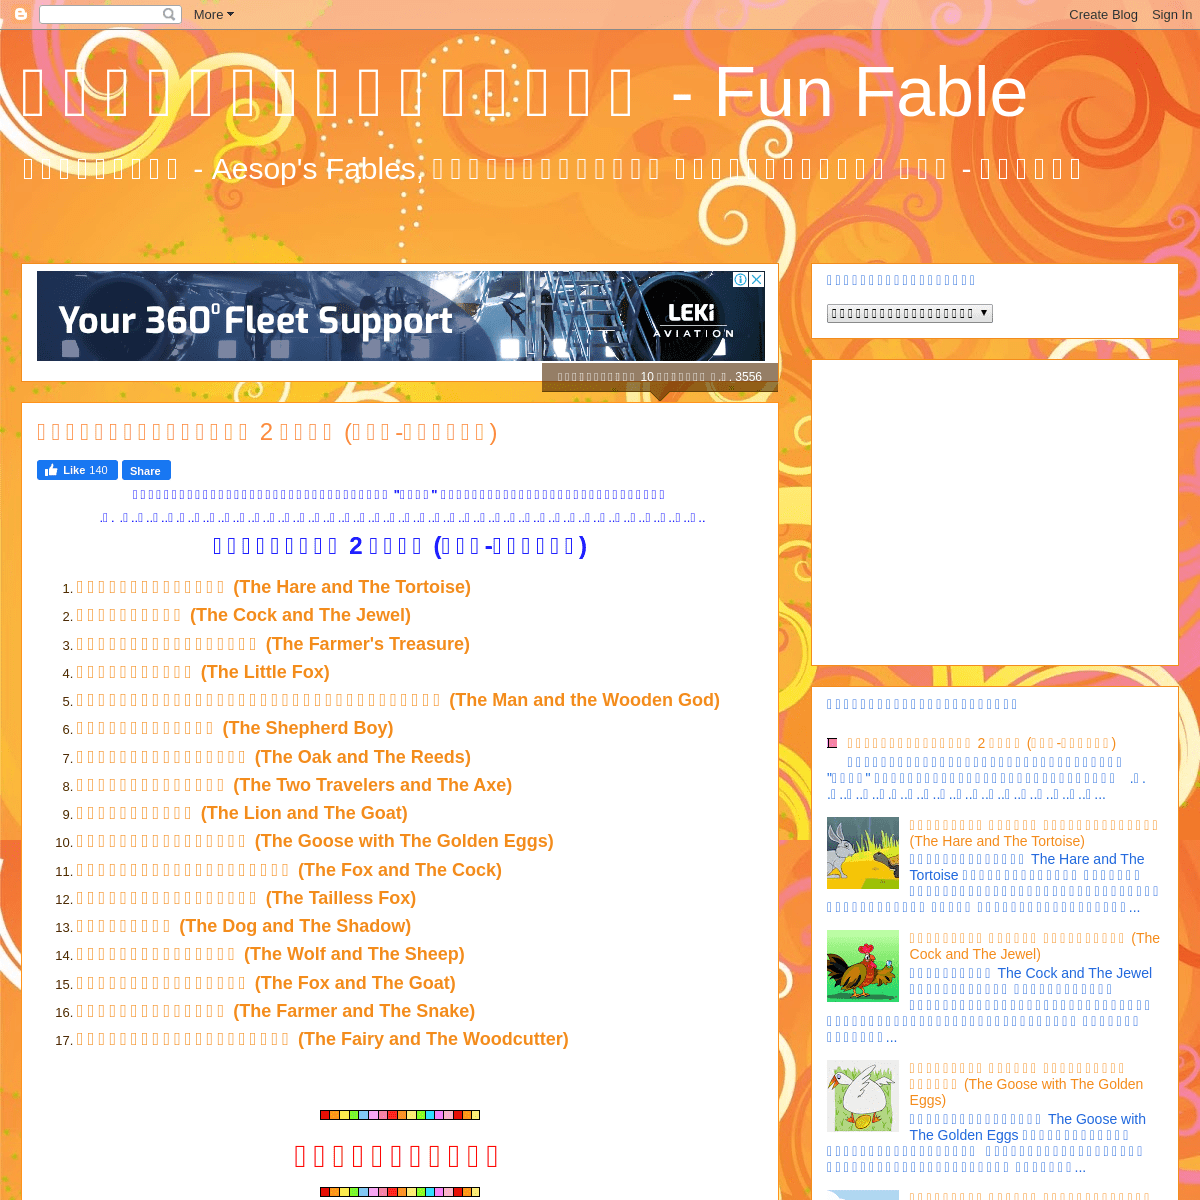 A complete backup of fun-fable.blogspot.com